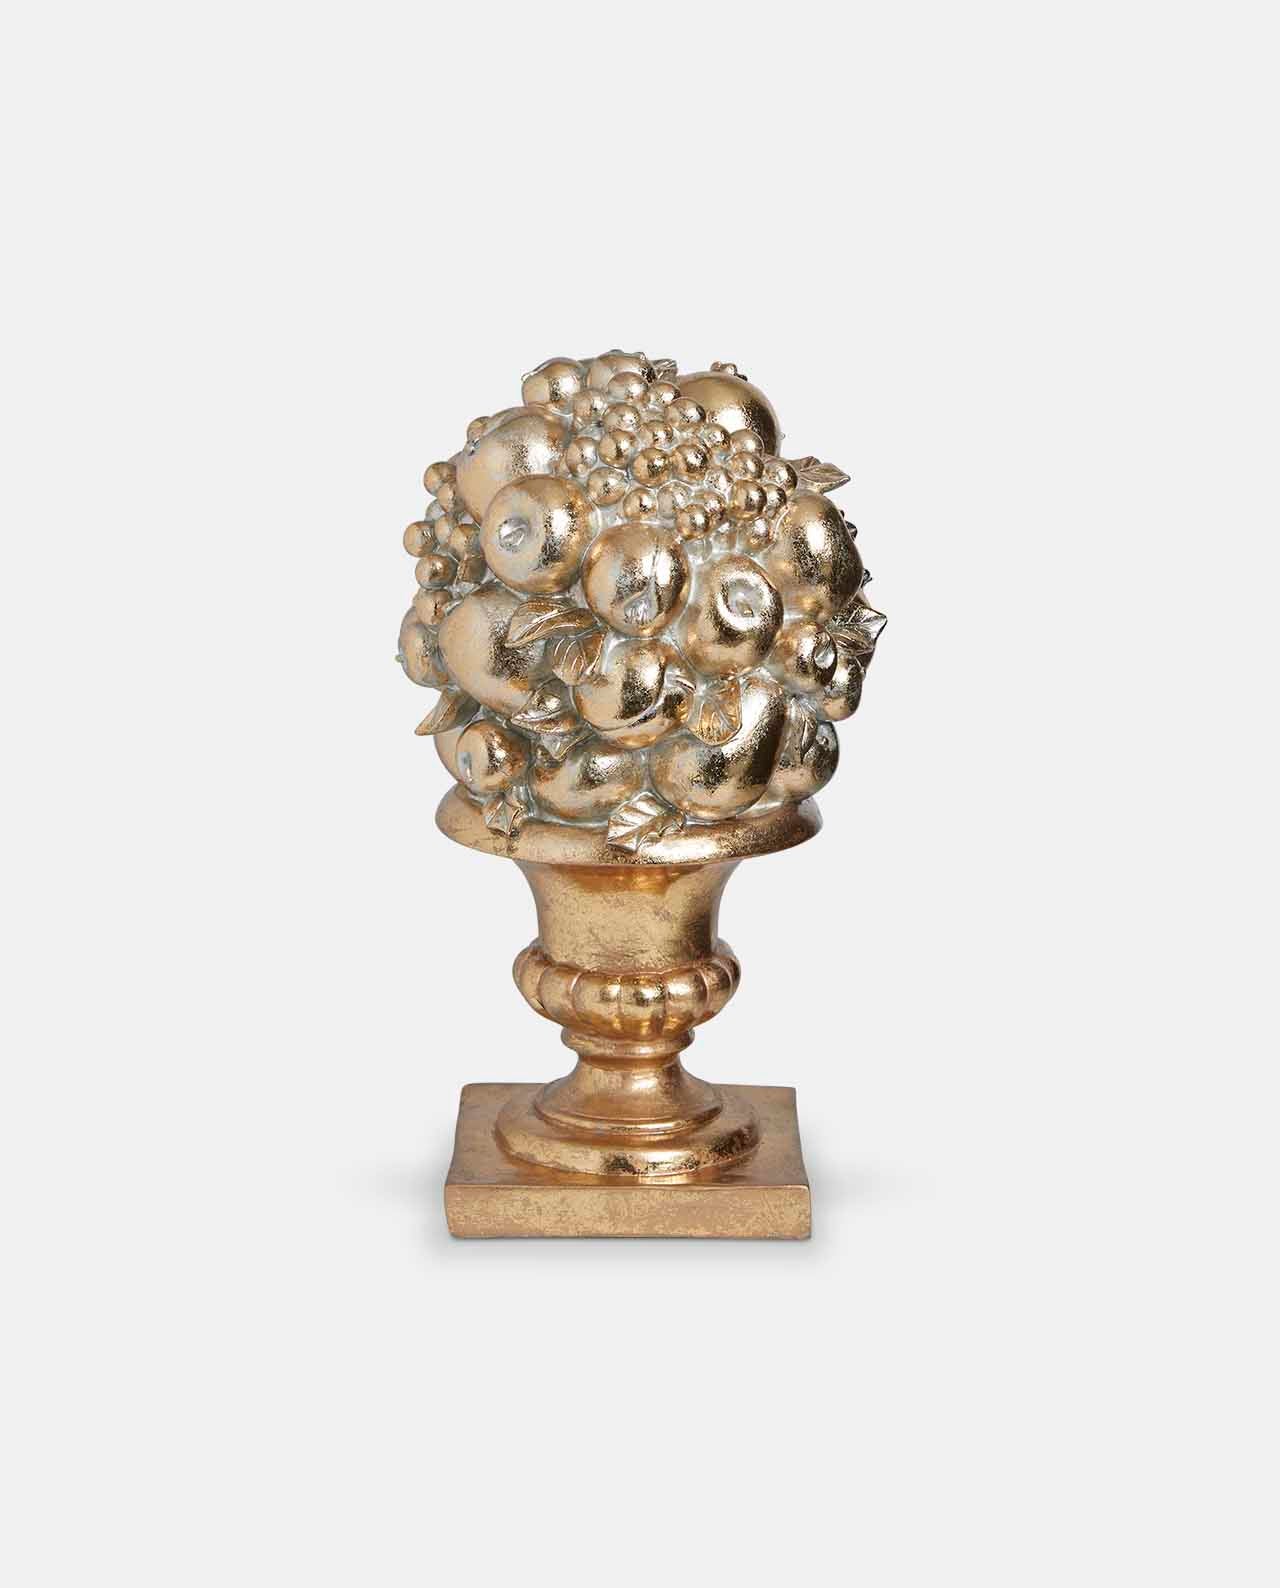 Gold Decorative Round Urn for sale - Woodcock and Cavendish